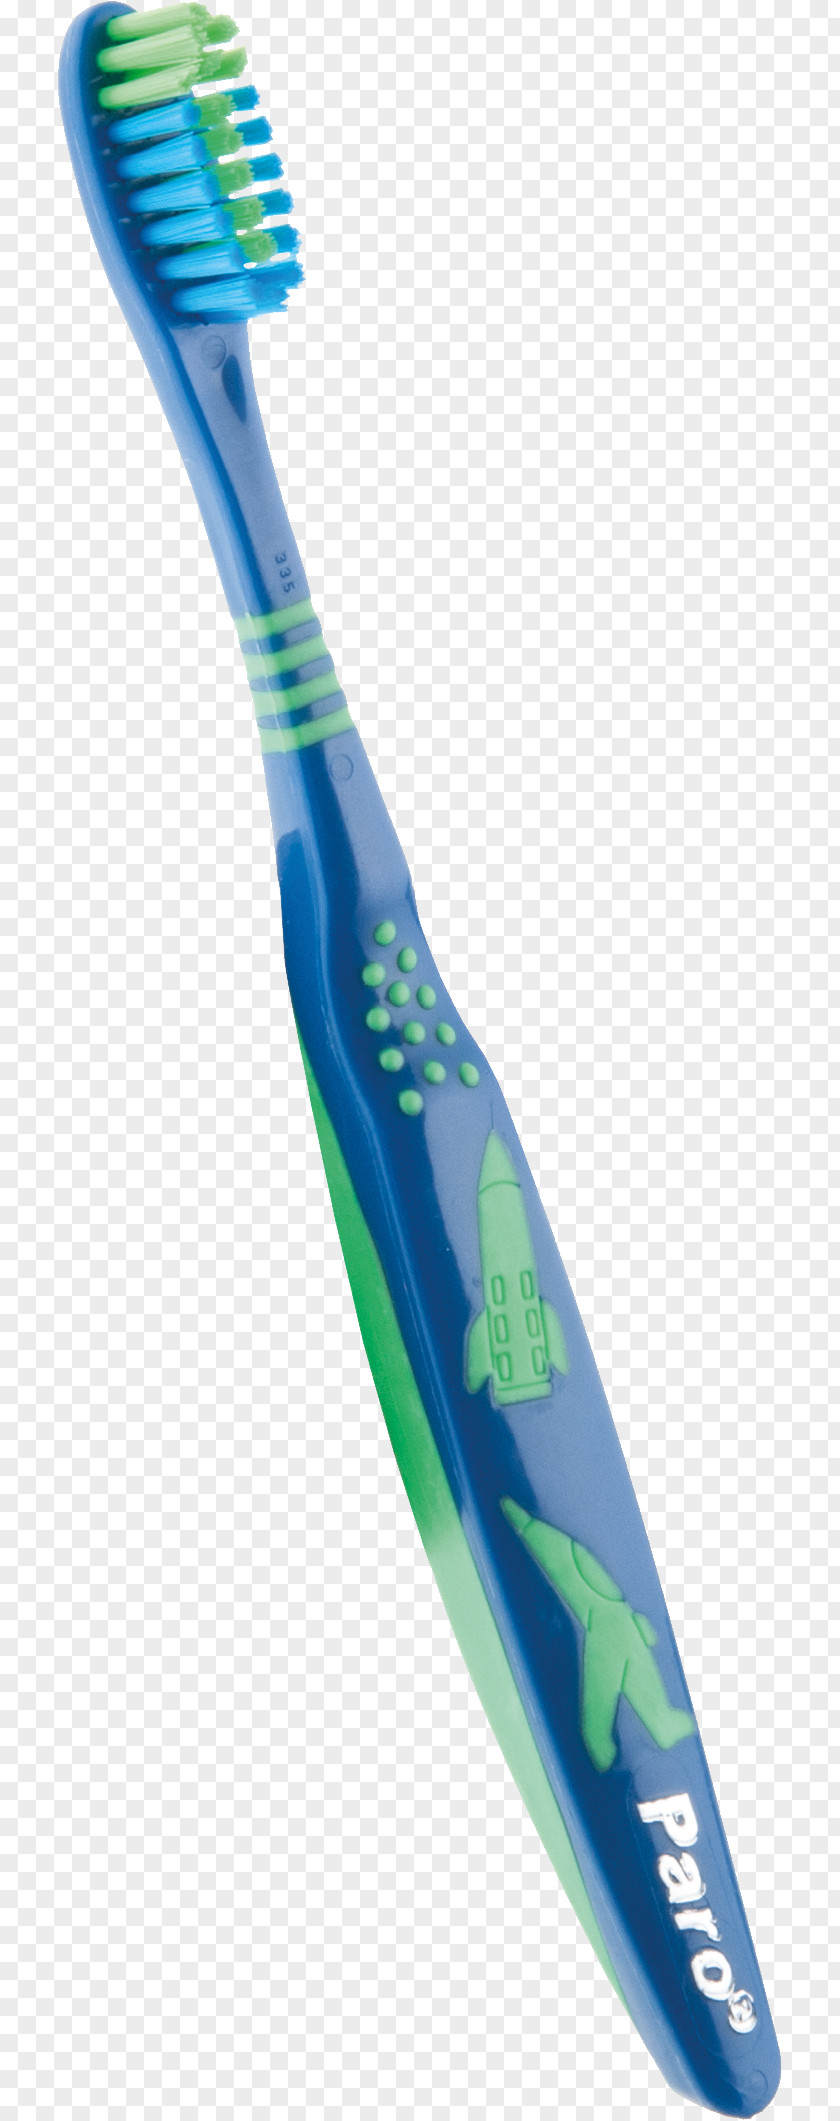 Toothbrash Image Toothbrush Toothpaste PNG